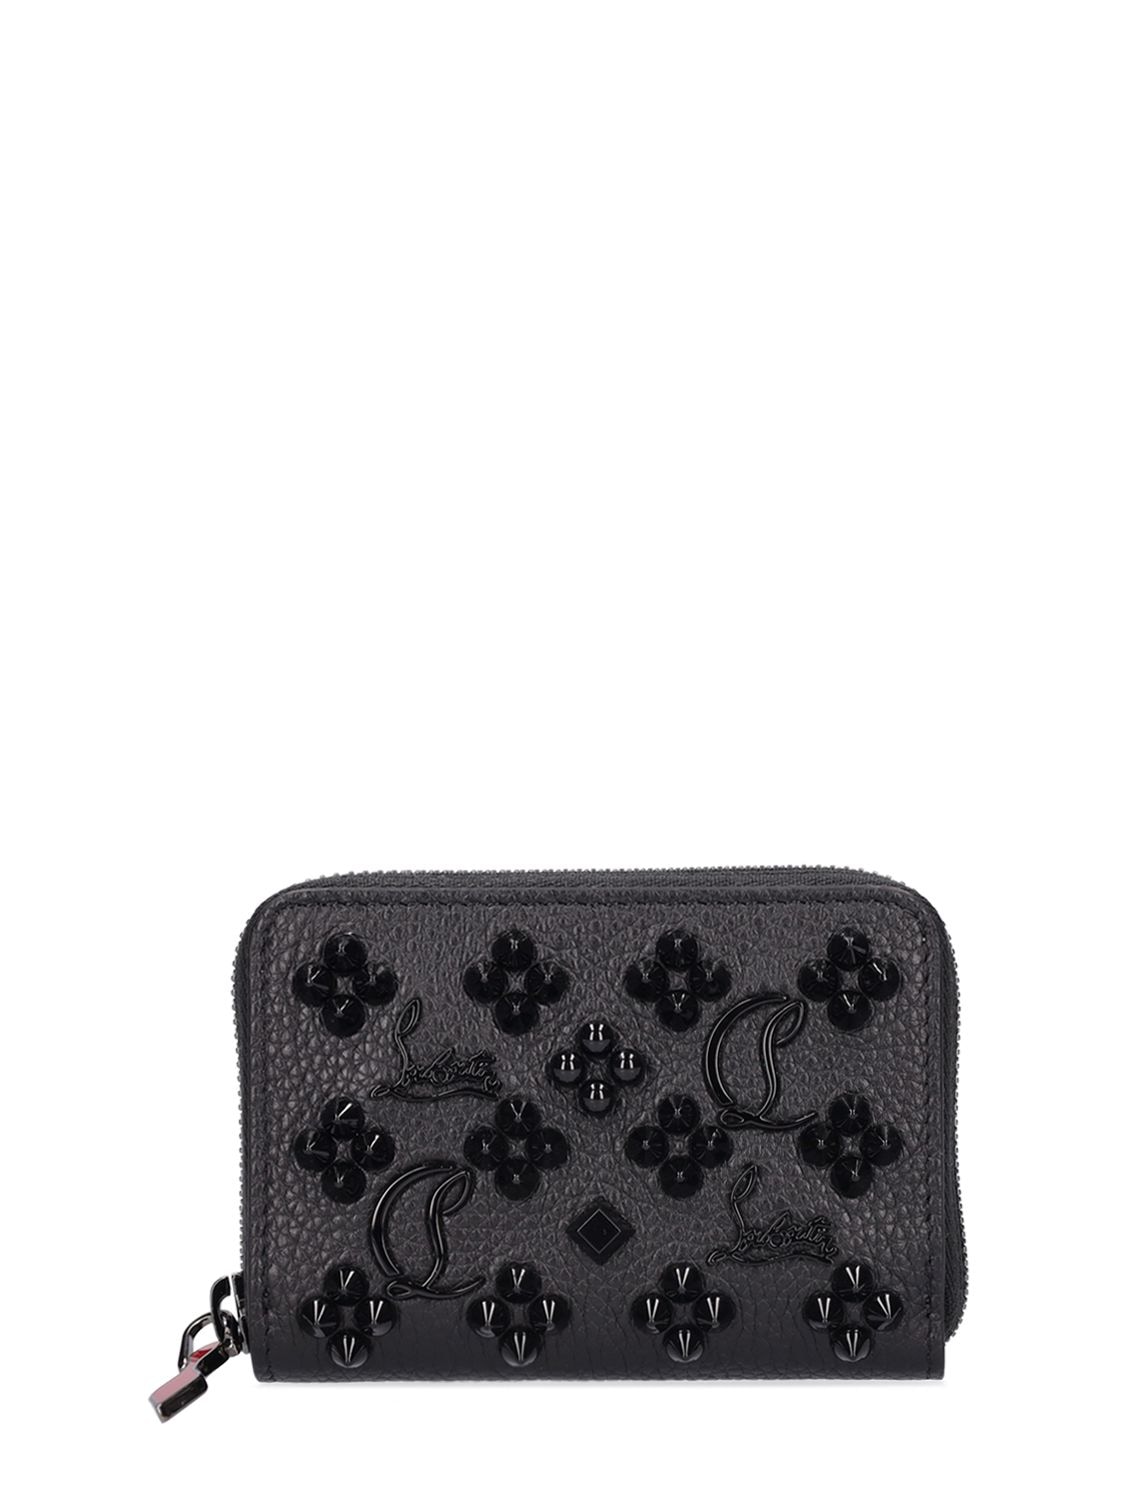 Christian Louboutin Panettone Leather Zip Wallet In Black,ultrablac